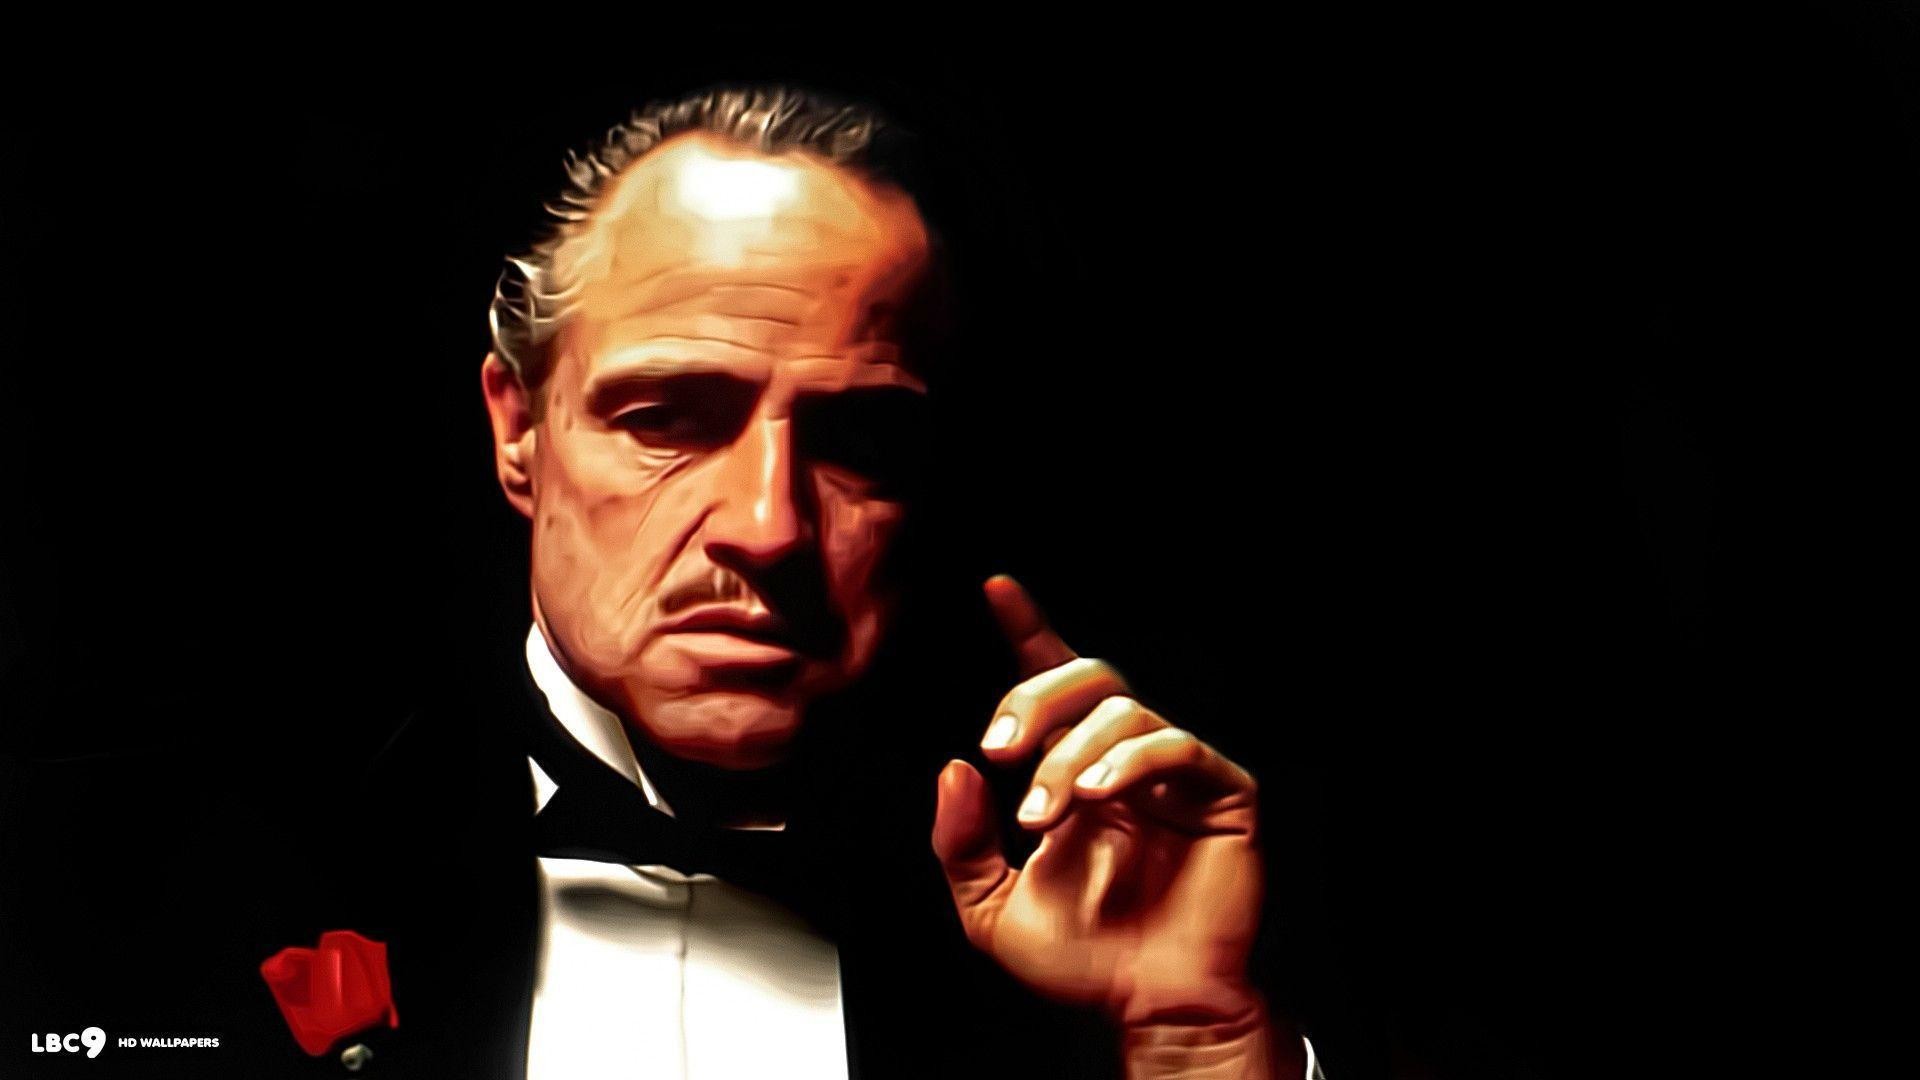 1920x1080 Wallpapers For > The Godfather Wallpaper